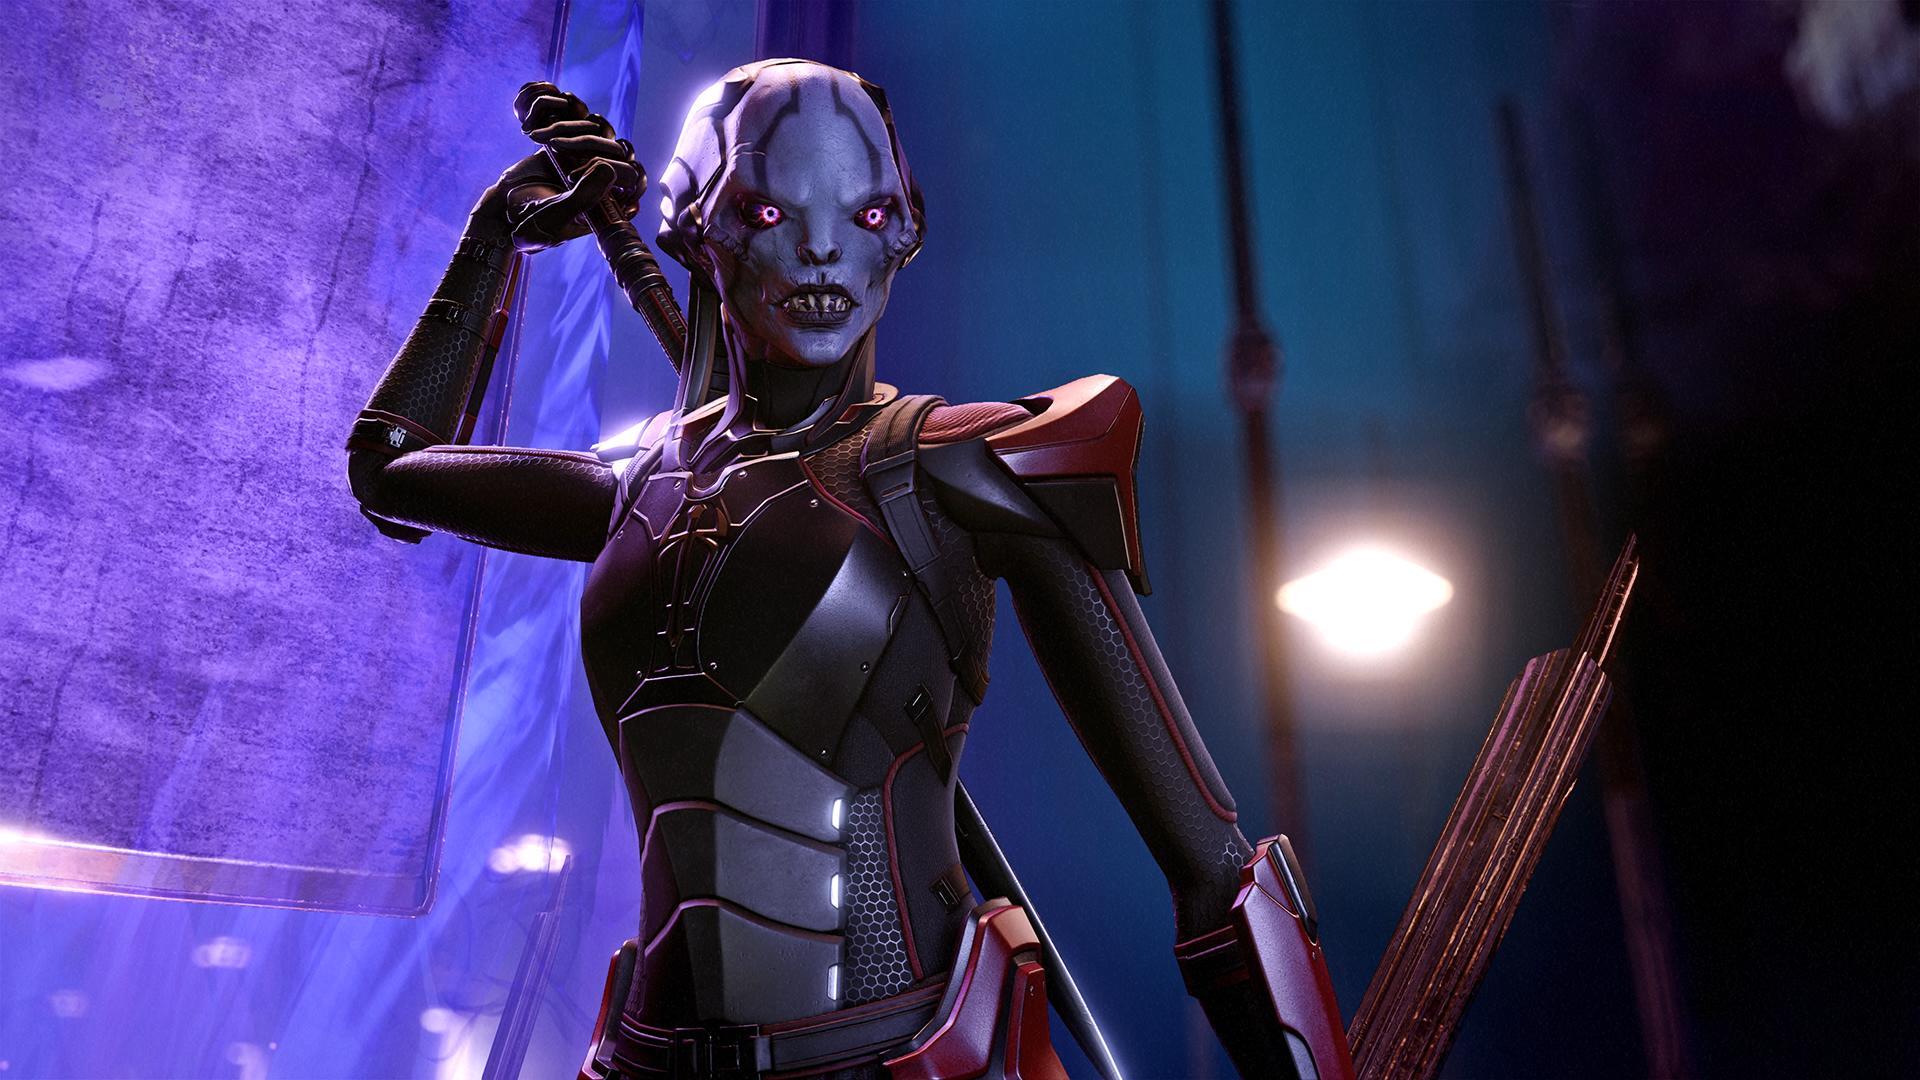 Image for The Chosen in XCOM 2's expansion mean business. First up is the Assassin